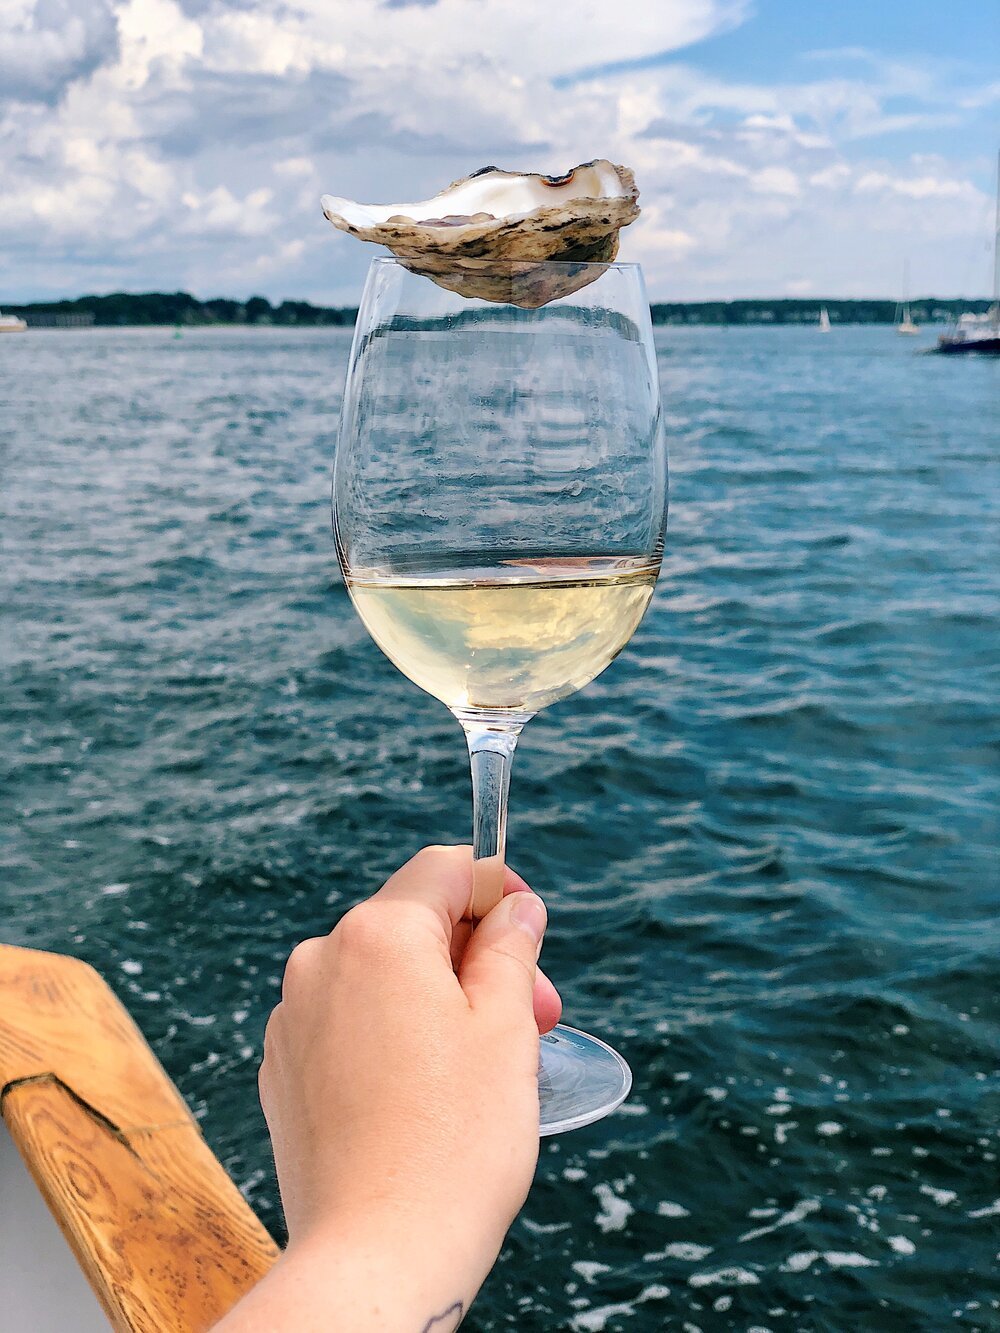 wine_wise_events_sail_portland_maine_oyster_white.jpg